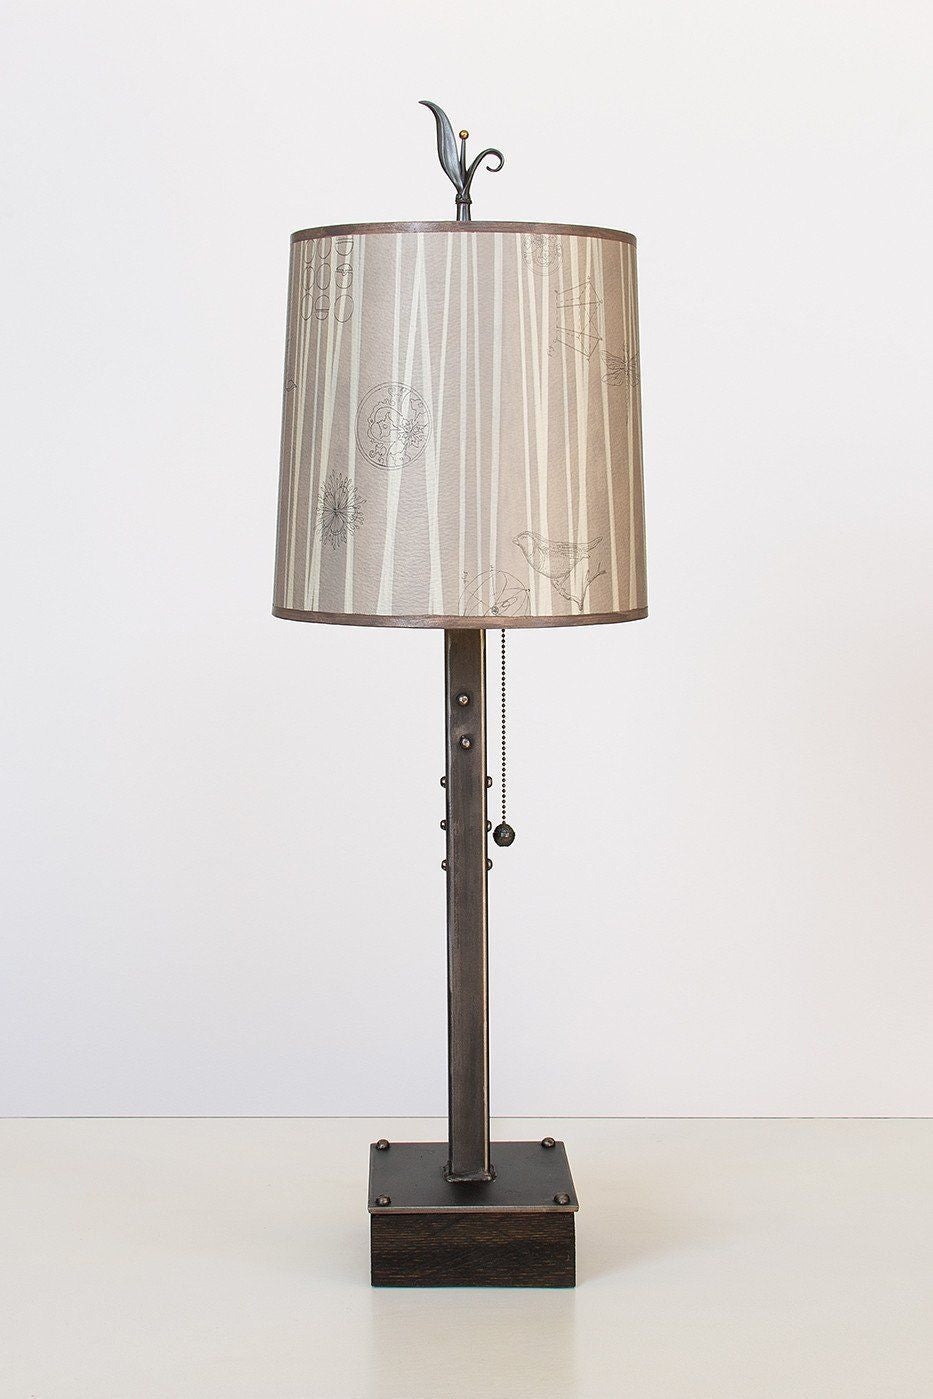 Janna Ugone & Co Table Lamps Steel Table Lamp on Wood with Medium Drum Shade in Birch Lines